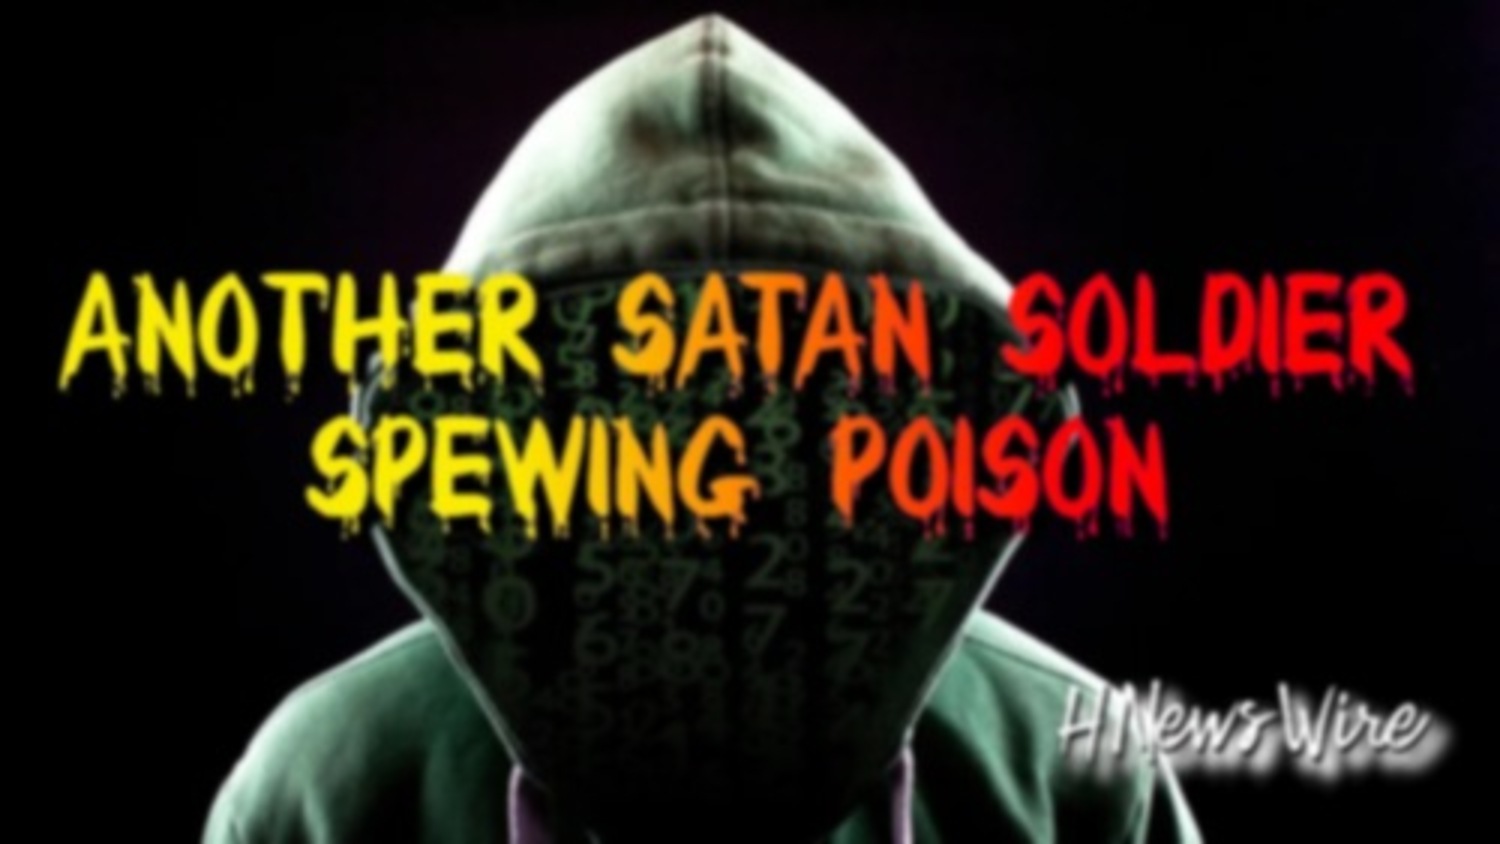 Satan Soldiers Another Spewing Poison2`1500